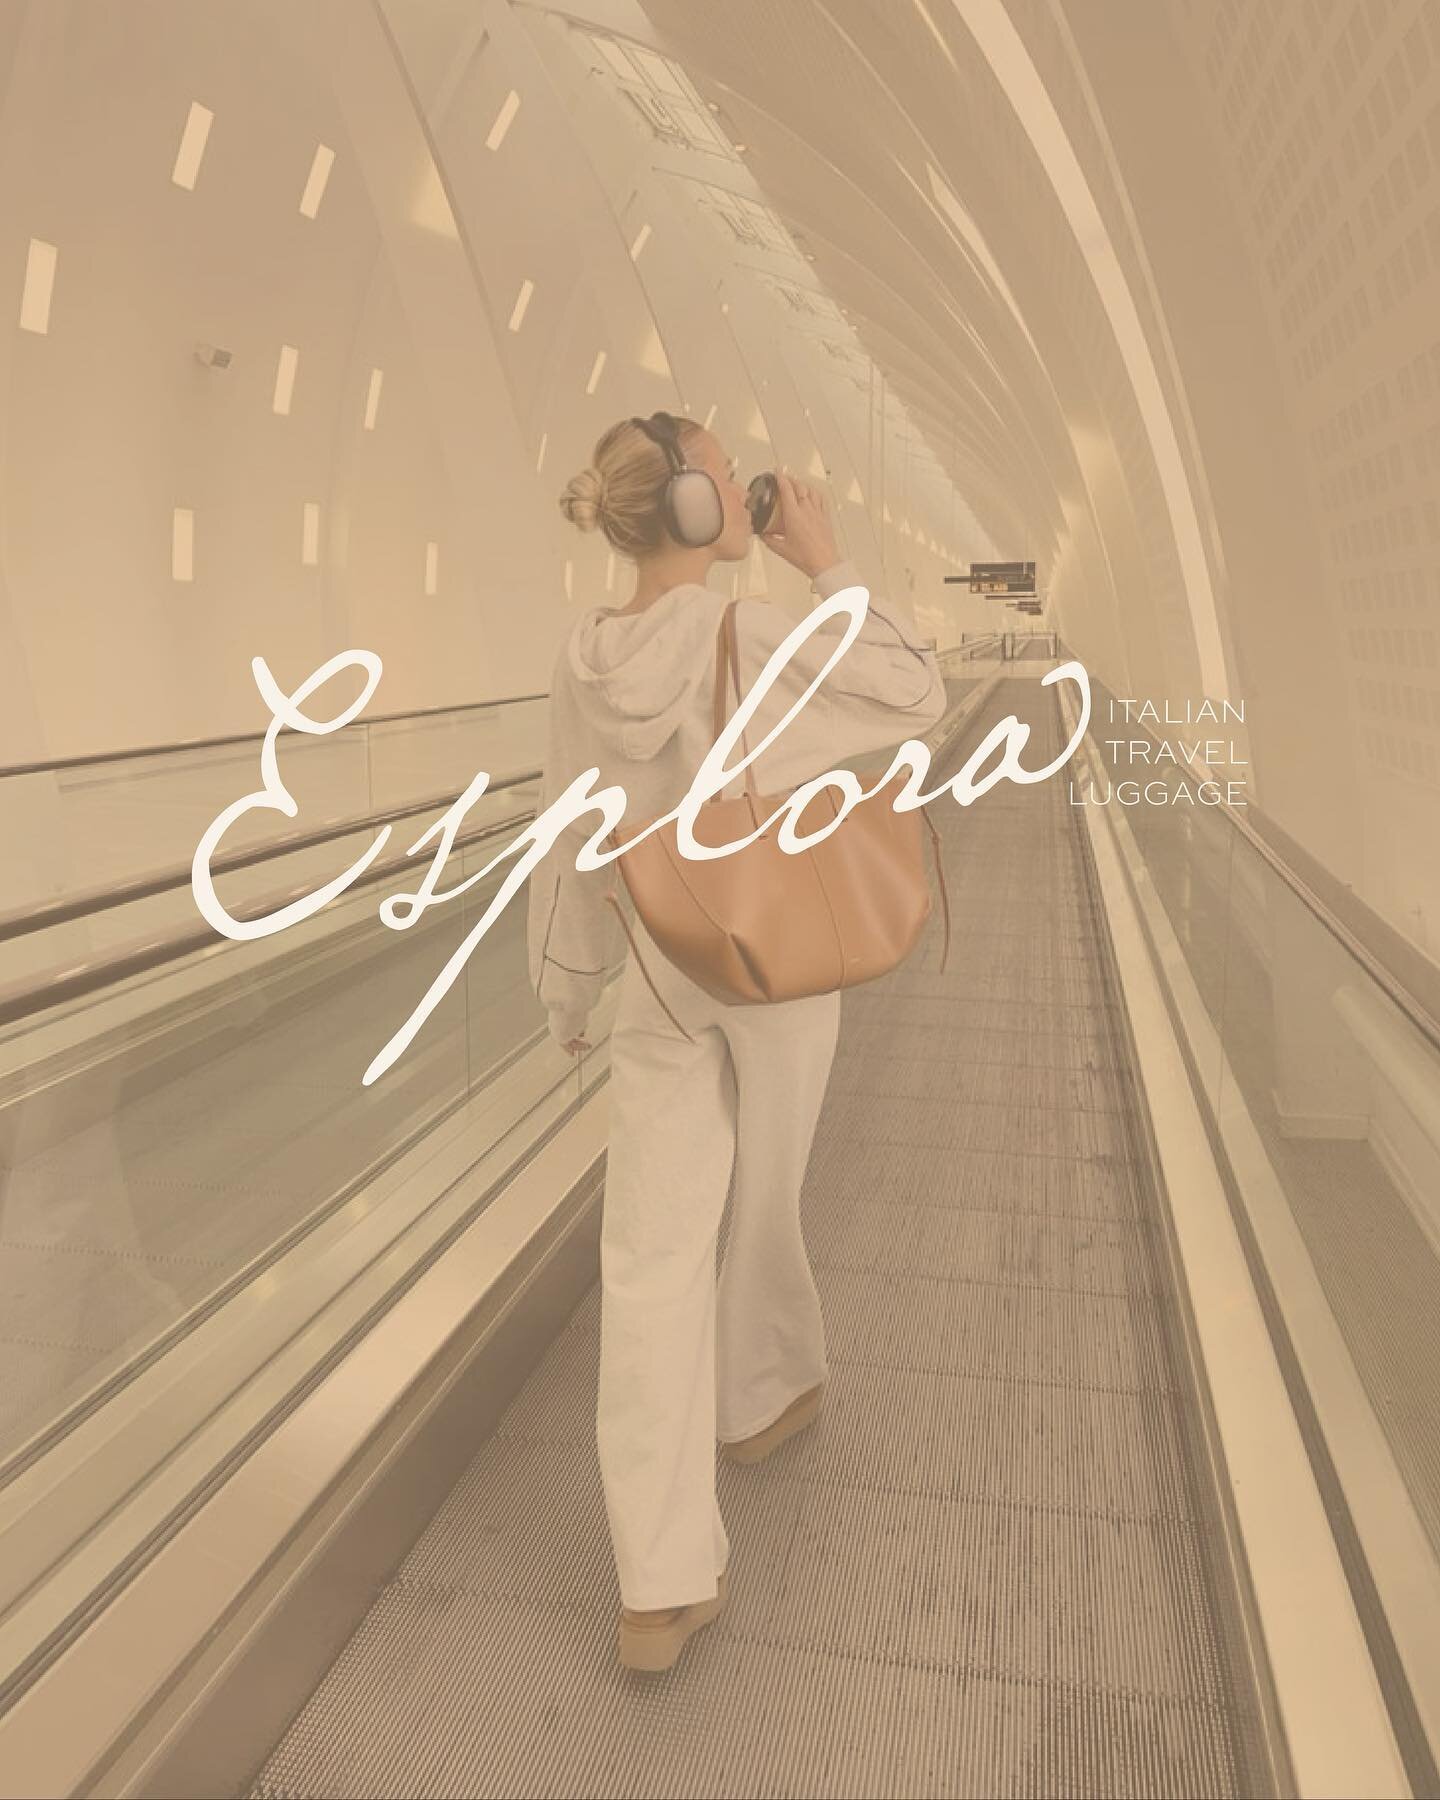 Esplora ✈️🧳🤍 
&ldquo;a brand that offers travel products, aiming to elevate the luxury travel experience&rdquo;

brief by @designerbriefs 🫶🏼 #dbesplora  #designerbriefs

a fun little brand identity prompt!! I&rsquo;m loving these design briefs on